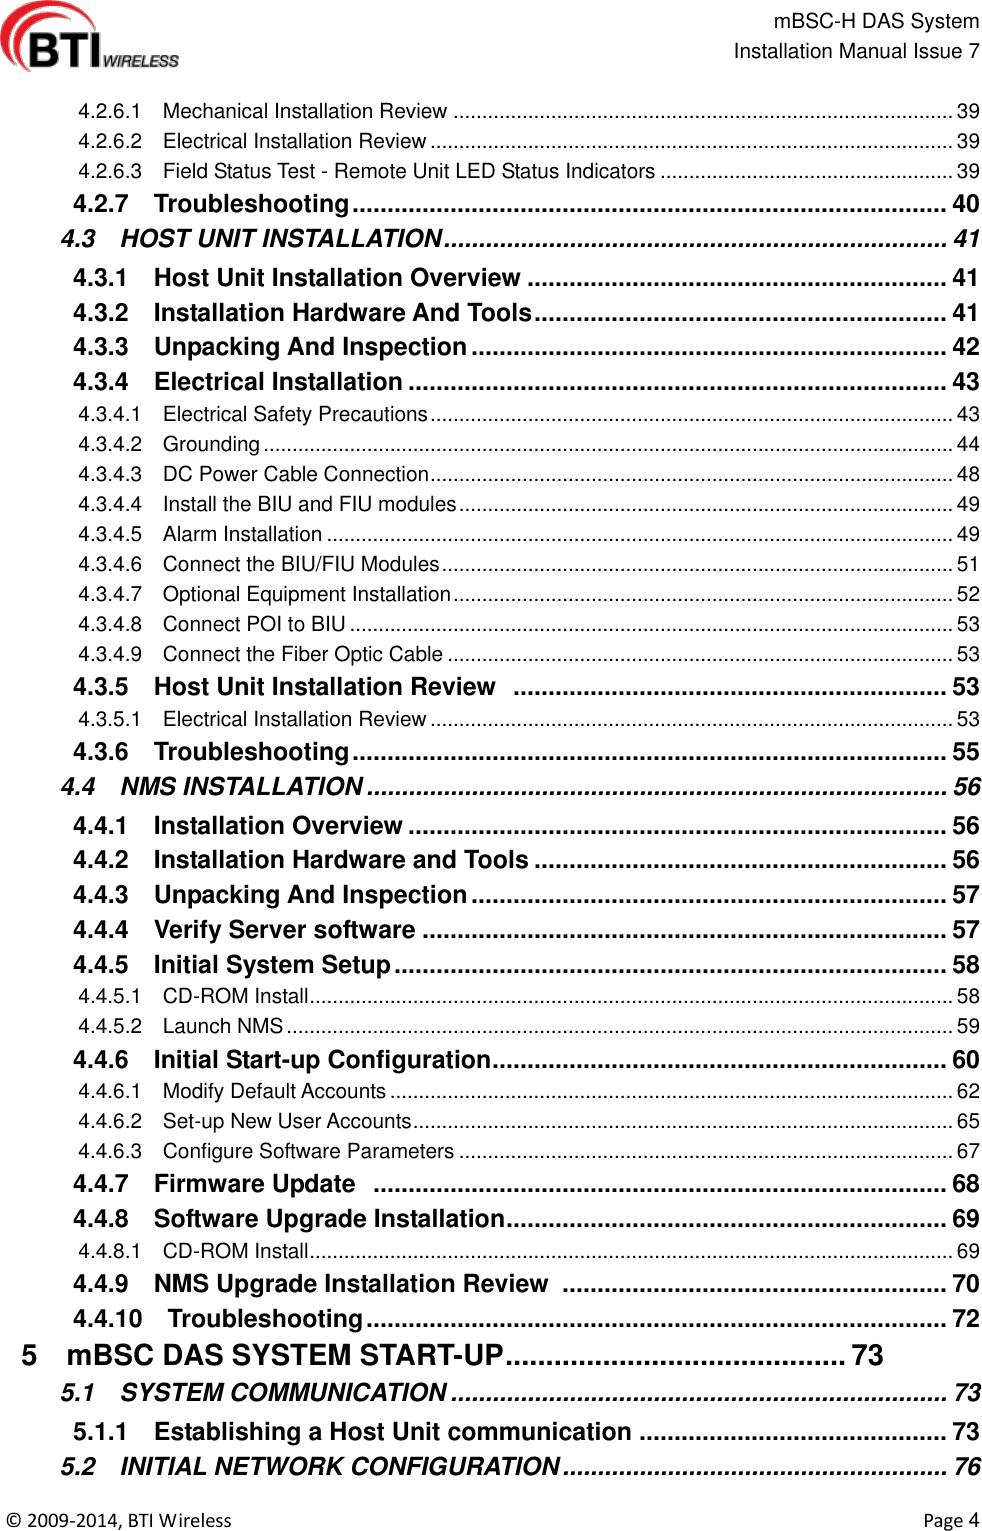                                                   mBSC-H DAS System   Installation Manual Issue 7  ©  2009-2014, BTI Wireless    Page 4    4.2.6.1    Mechanical Installation Review ....................................................................................... 39   4.2.6.2    Electrical Installation Review ........................................................................................... 39   4.2.6.3    Field Status Test - Remote Unit LED Status Indicators ................................................... 39   4.2.7    Troubleshooting ..................................................................................... 40   4.3    HOST UNIT INSTALLATION ........................................................................ 41   4.3.1    Host Unit Installation Overview ............................................................ 41   4.3.2    Installation Hardware And Tools ........................................................... 41   4.3.3    Unpacking And Inspection .................................................................... 42   4.3.4    Electrical Installation ............................................................................. 43   4.3.4.1    Electrical Safety Precautions ........................................................................................... 43   4.3.4.2    Grounding ........................................................................................................................ 44   4.3.4.3    DC Power Cable Connection ........................................................................................... 48   4.3.4.4    Install the BIU and FIU modules ...................................................................................... 49   4.3.4.5    Alarm Installation ............................................................................................................. 49   4.3.4.6    Connect the BIU/FIU Modules ......................................................................................... 51   4.3.4.7    Optional Equipment Installation ....................................................................................... 52   4.3.4.8    Connect POI to BIU ......................................................................................................... 53   4.3.4.9    Connect the Fiber Optic Cable ........................................................................................ 53   4.3.5    Host Unit Installation Review   .............................................................. 53   4.3.5.1    Electrical Installation Review ........................................................................................... 53   4.3.6    Troubleshooting ..................................................................................... 55   4.4    NMS INSTALLATION ................................................................................... 56   4.4.1    Installation Overview ............................................................................. 56   4.4.2    Installation Hardware and Tools ........................................................... 56   4.4.3    Unpacking And Inspection .................................................................... 57   4.4.4    Verify Server software ........................................................................... 57   4.4.5    Initial System Setup ............................................................................... 58   4.4.5.1    CD-ROM Install ................................................................................................................ 58   4.4.5.2    Launch NMS .................................................................................................................... 59   4.4.6    Initial Start-up Configuration ................................................................. 60   4.4.6.1    Modify Default Accounts .................................................................................................. 62   4.4.6.2    Set-up New User Accounts .............................................................................................. 65   4.4.6.3    Configure Software Parameters ...................................................................................... 67   4.4.7    Firmware Update   .................................................................................. 68   4.4.8    Software Upgrade Installation ............................................................... 69   4.4.8.1    CD-ROM Install ................................................................................................................ 69   4.4.9    NMS Upgrade Installation Review   ....................................................... 70   4.4.10    Troubleshooting ................................................................................... 72   5    mBSC DAS SYSTEM START-UP .......................................... 73   5.1    SYSTEM COMMUNICATION ....................................................................... 73   5.1.1    Establishing a Host Unit communication ............................................ 73   5.2    INITIAL NETWORK CONFIGURATION ....................................................... 76 